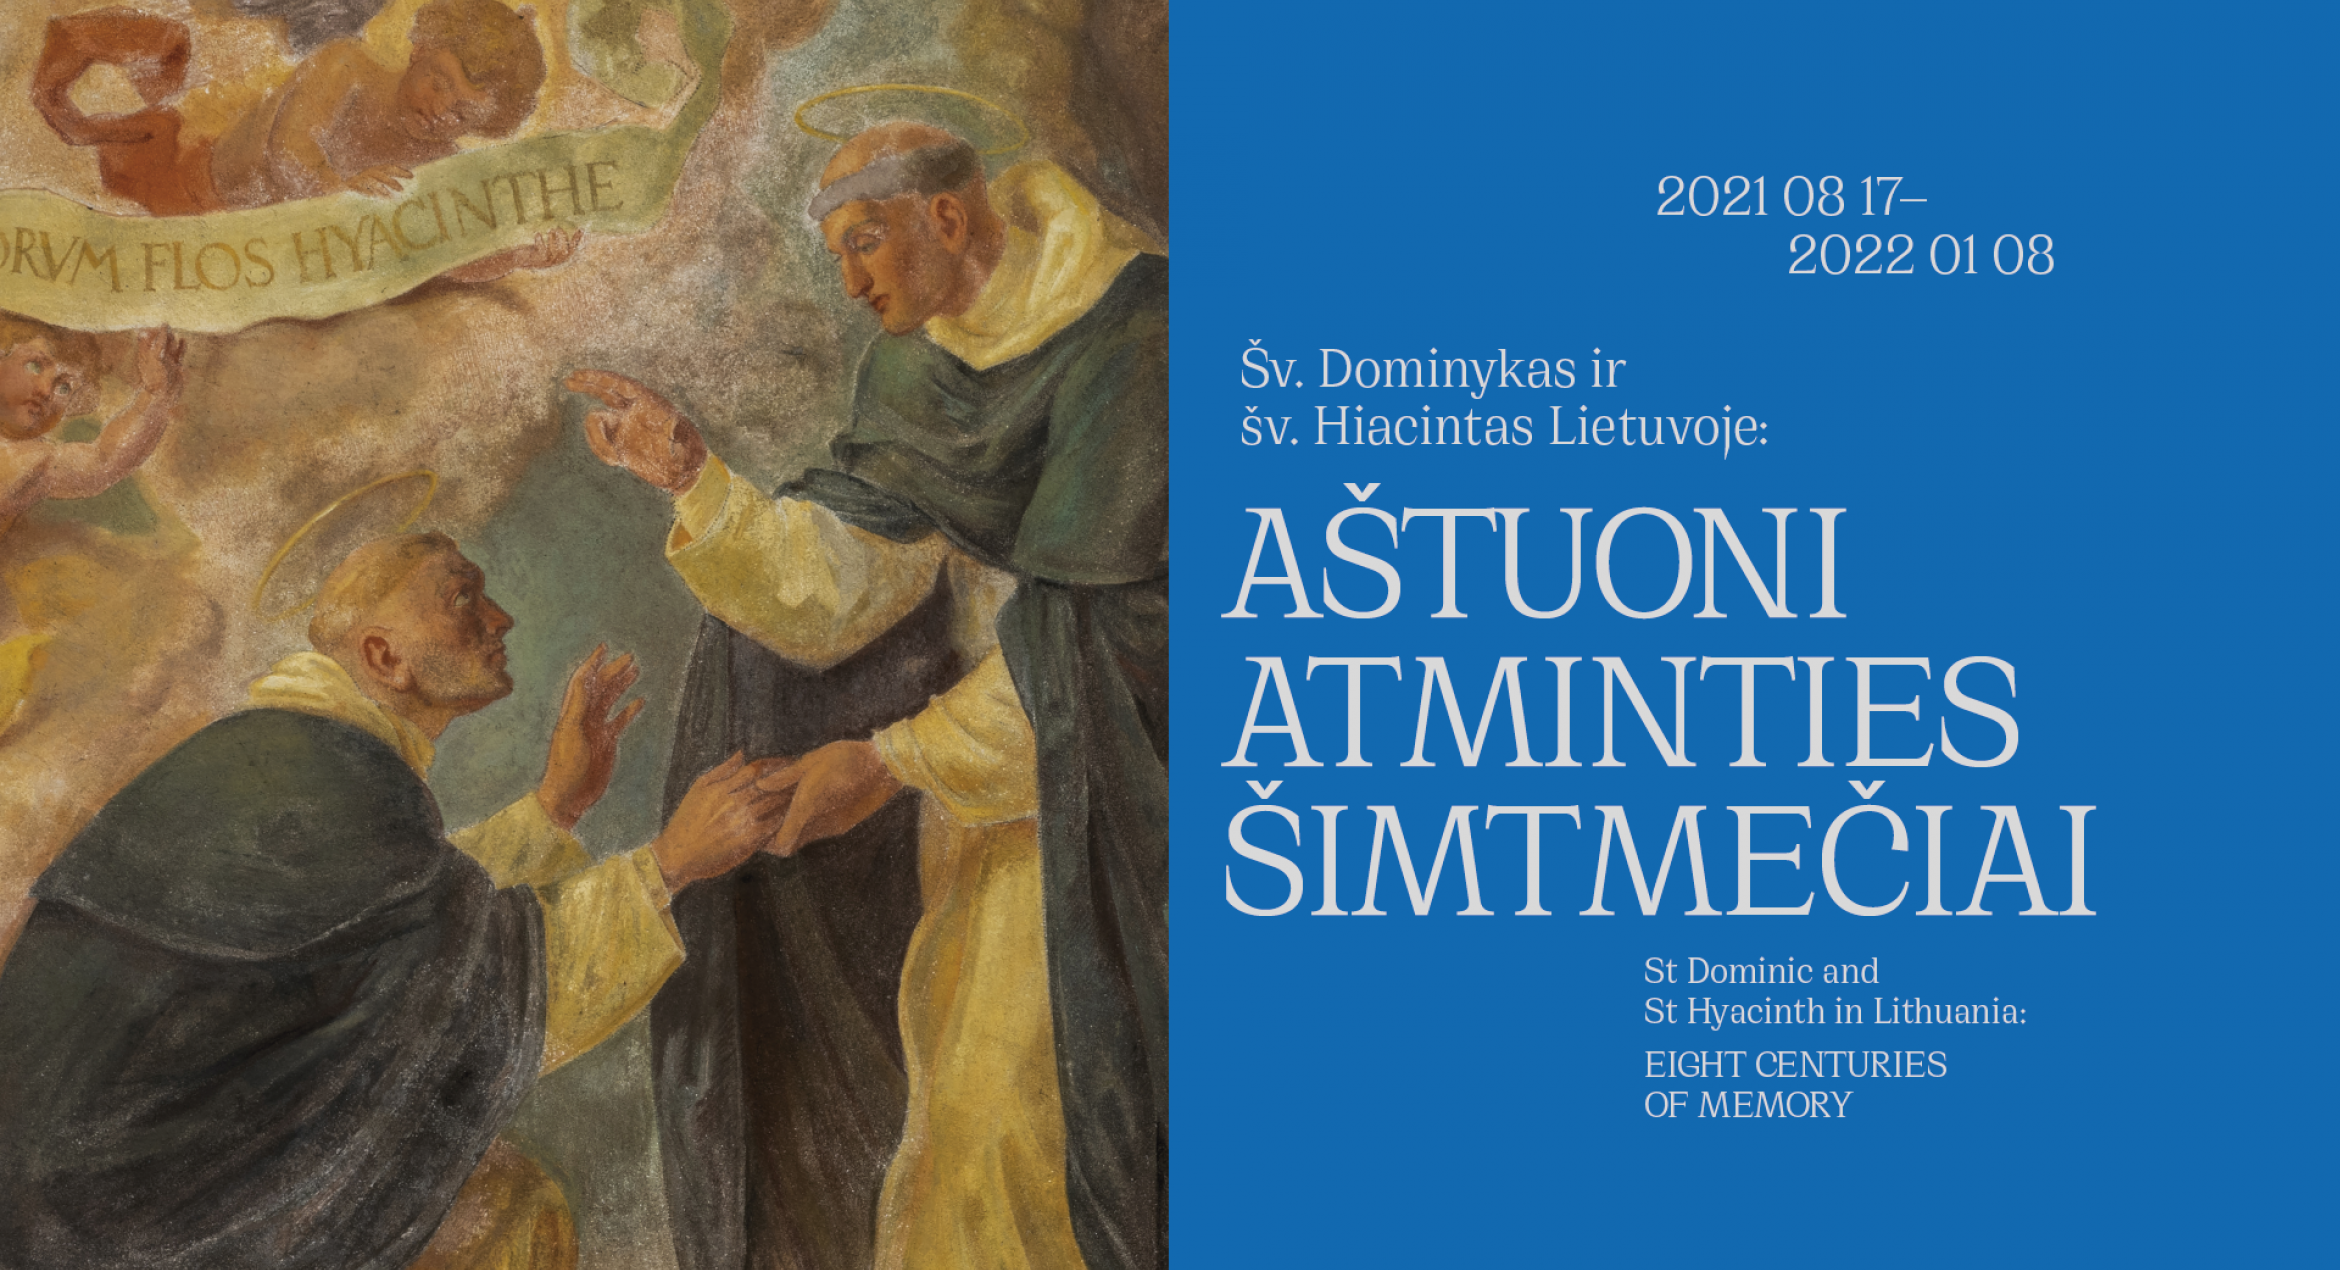 St Dominic and St Hyacinth in Lithuania: Eight Centuries of Memory